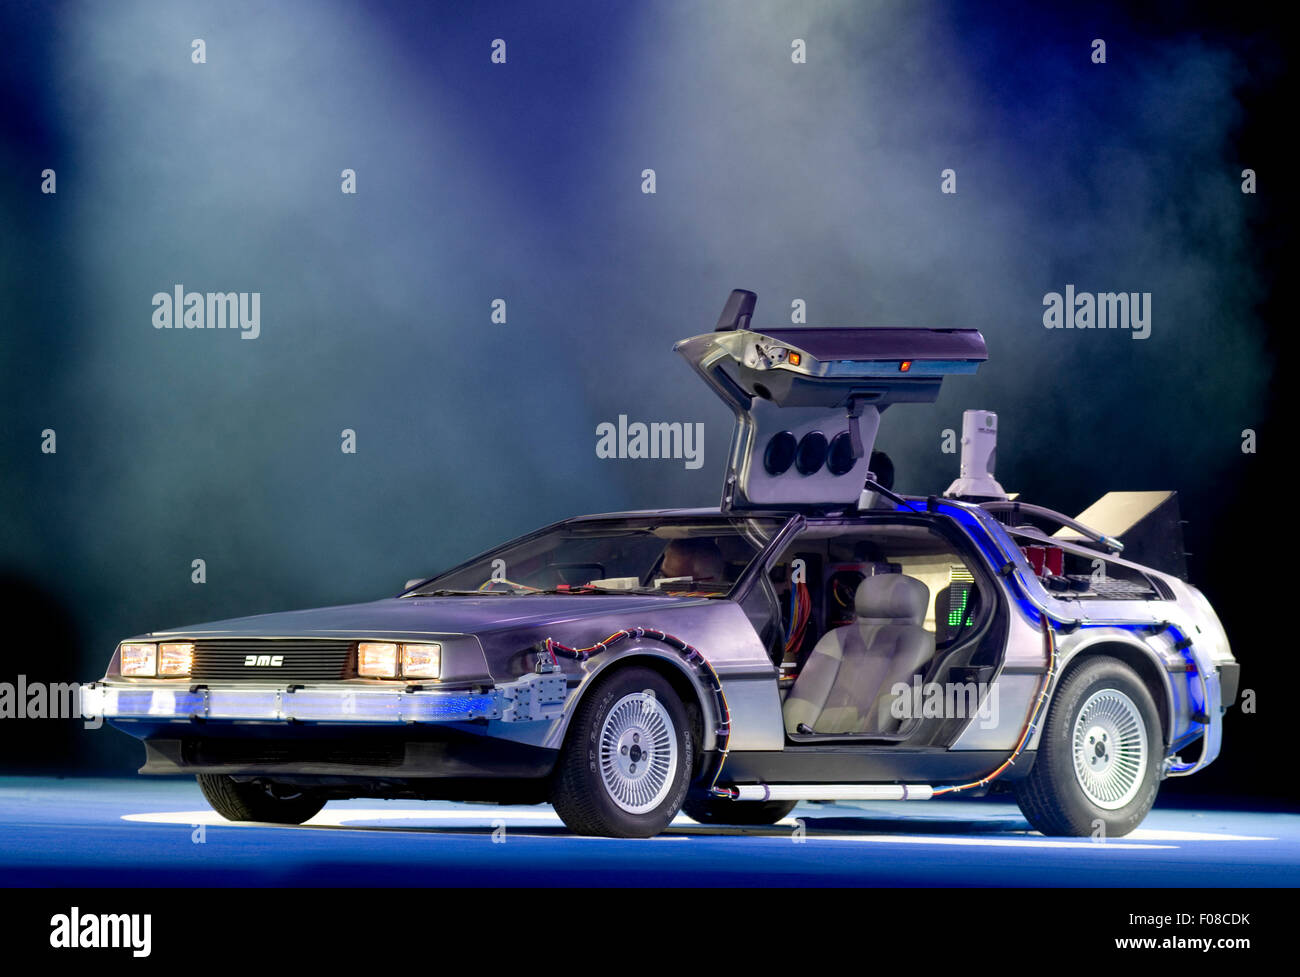 Replica time machine car from Back to the Future on stage at The